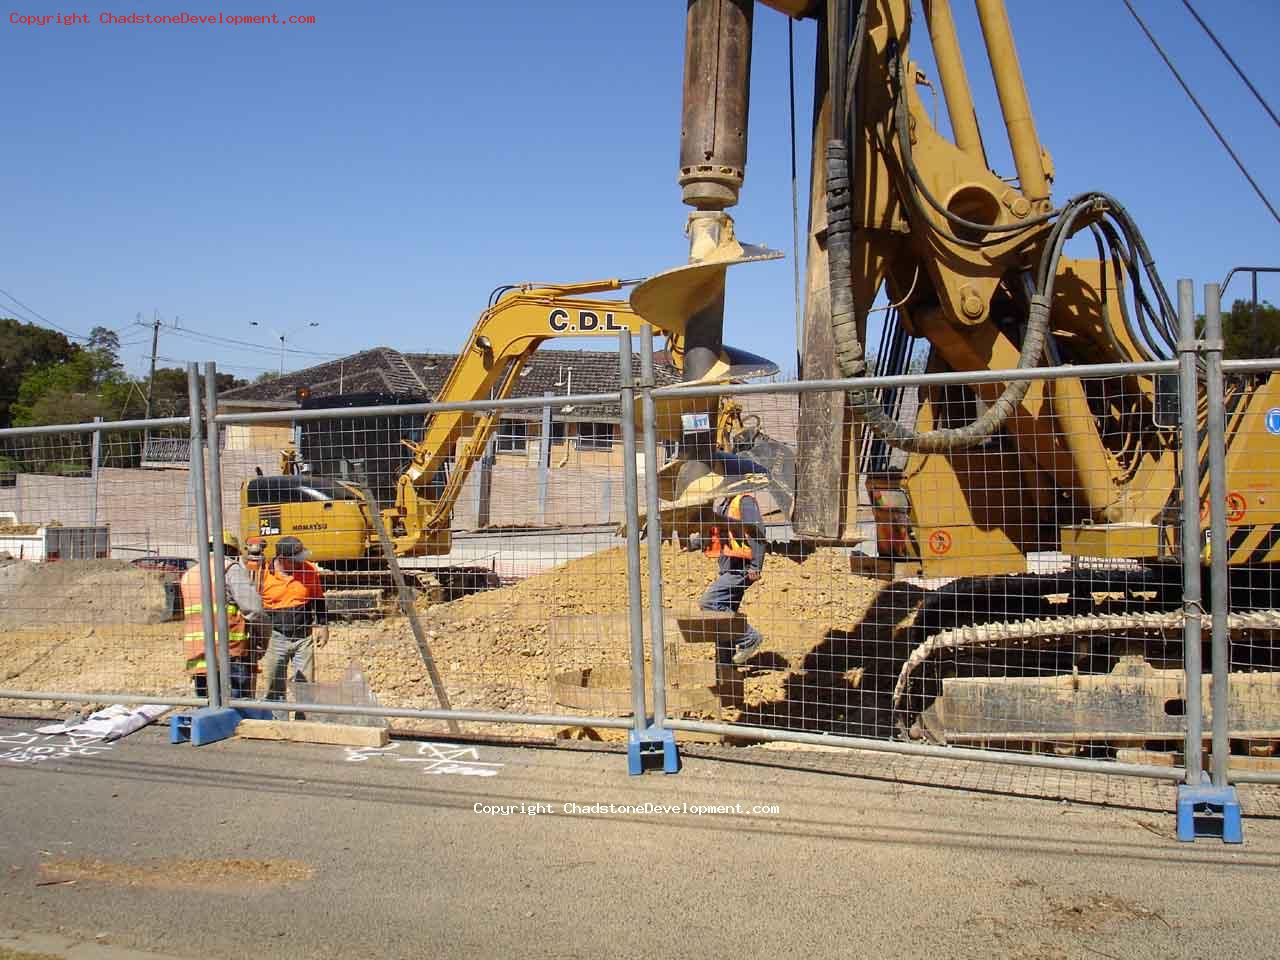 Piling machine with drill bit - Chadstone Development Discussions